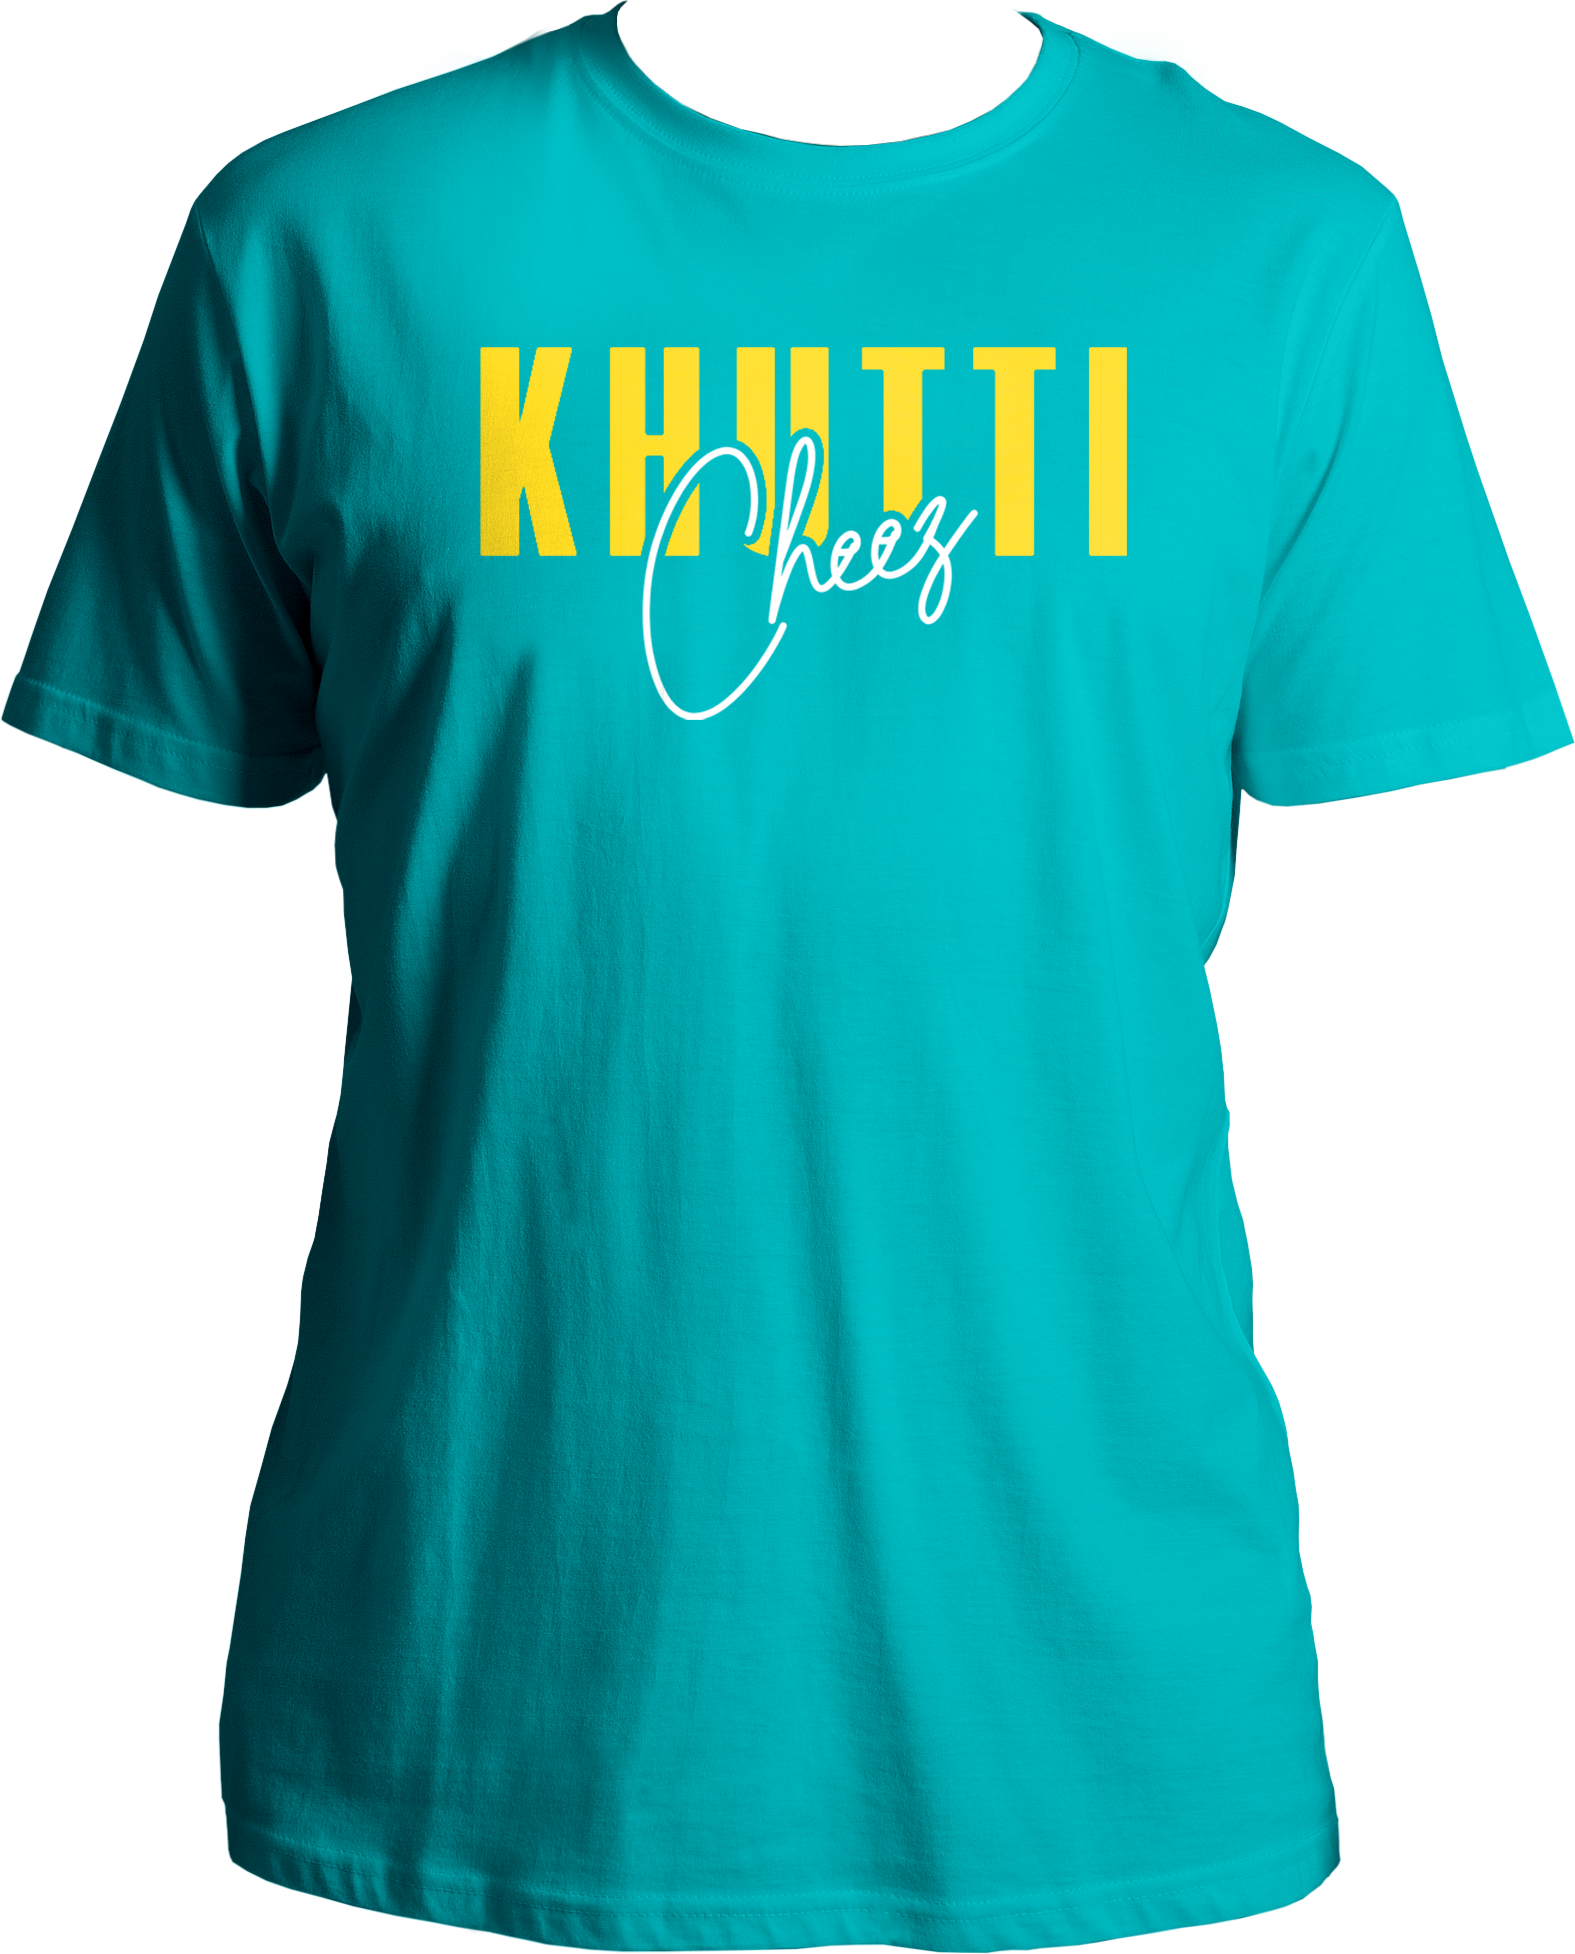 "Jatt Taan Sire Di Khutti Cheez Ai!" - Get ready to groove to Diljit's beats with this catchy line from the song, now immortalized on our stylish tee.<br data-mce-fragment="1"><br data-mce-fragment="1">We're thrilled to present a brand new and amazing range of Diljit Dosanjh T-Shirts, specially crafted for all his fans around the world. Dive into the magic of Diljit's music, movies, and charisma with our exclusive collection.